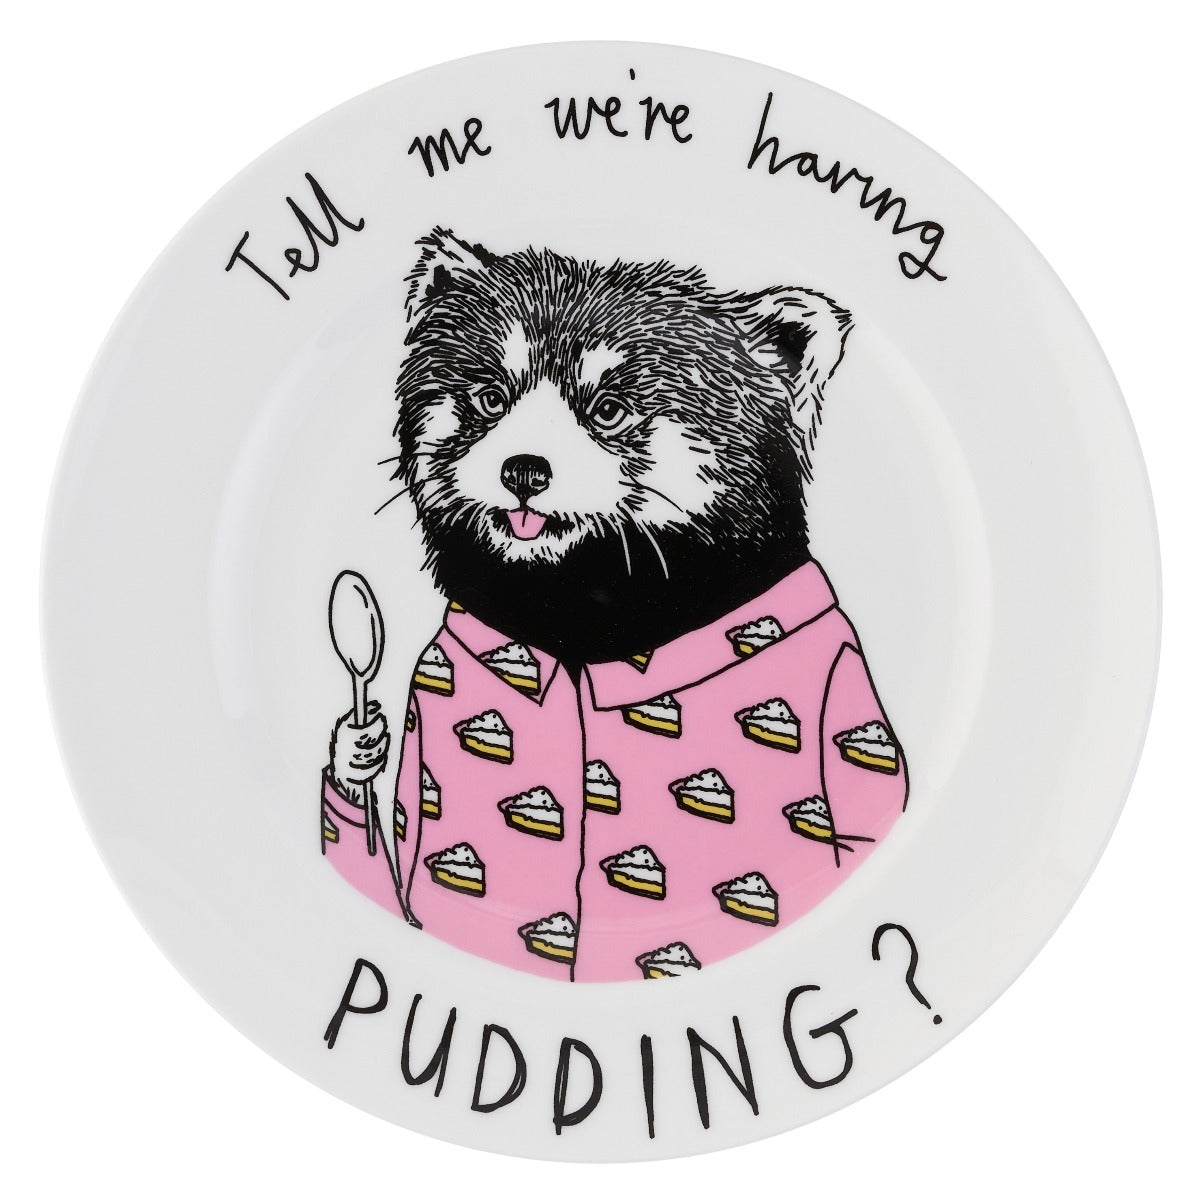 'Tell Me We're Having Pudding?' Side Plate